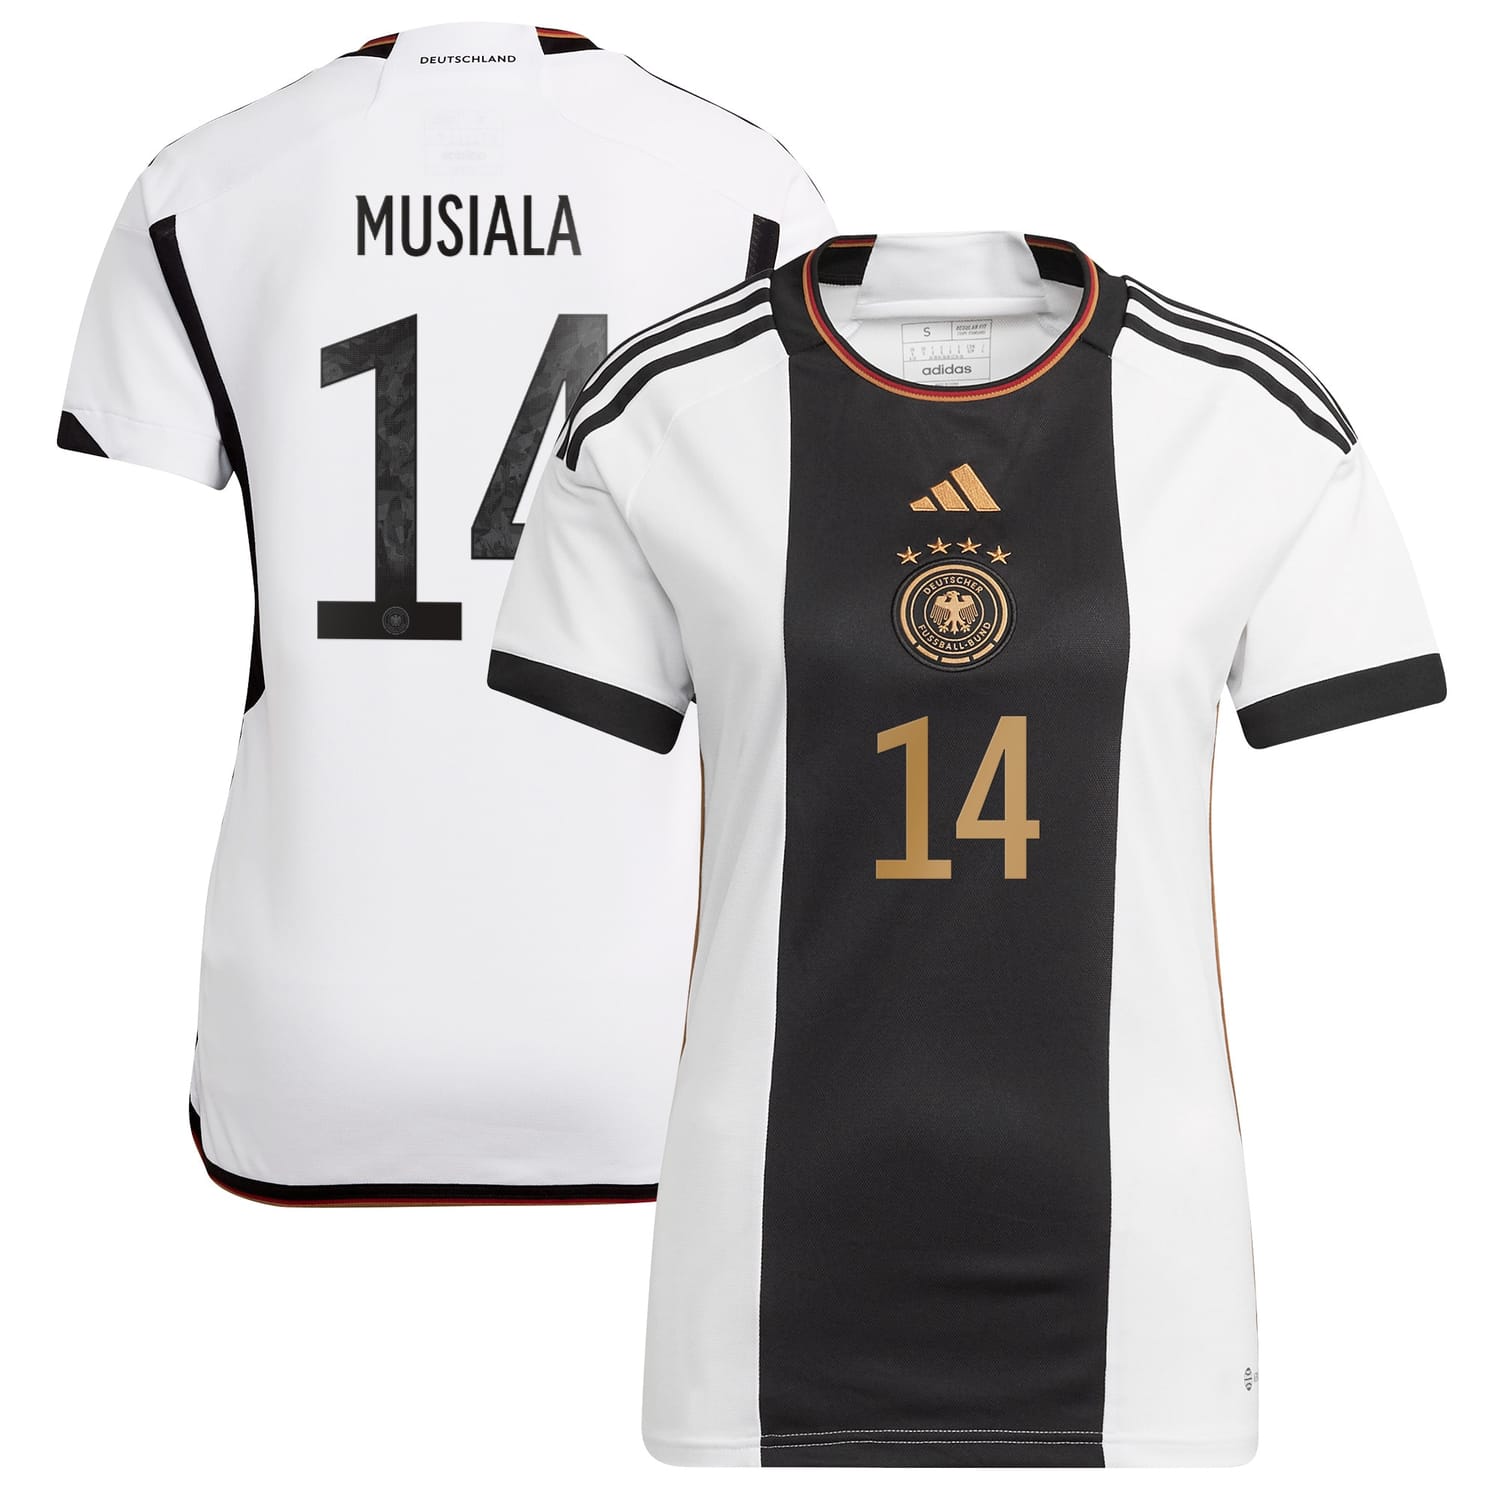 Germany National Team Home Jersey Shirt player Jamal Musiala 14 printing for Women